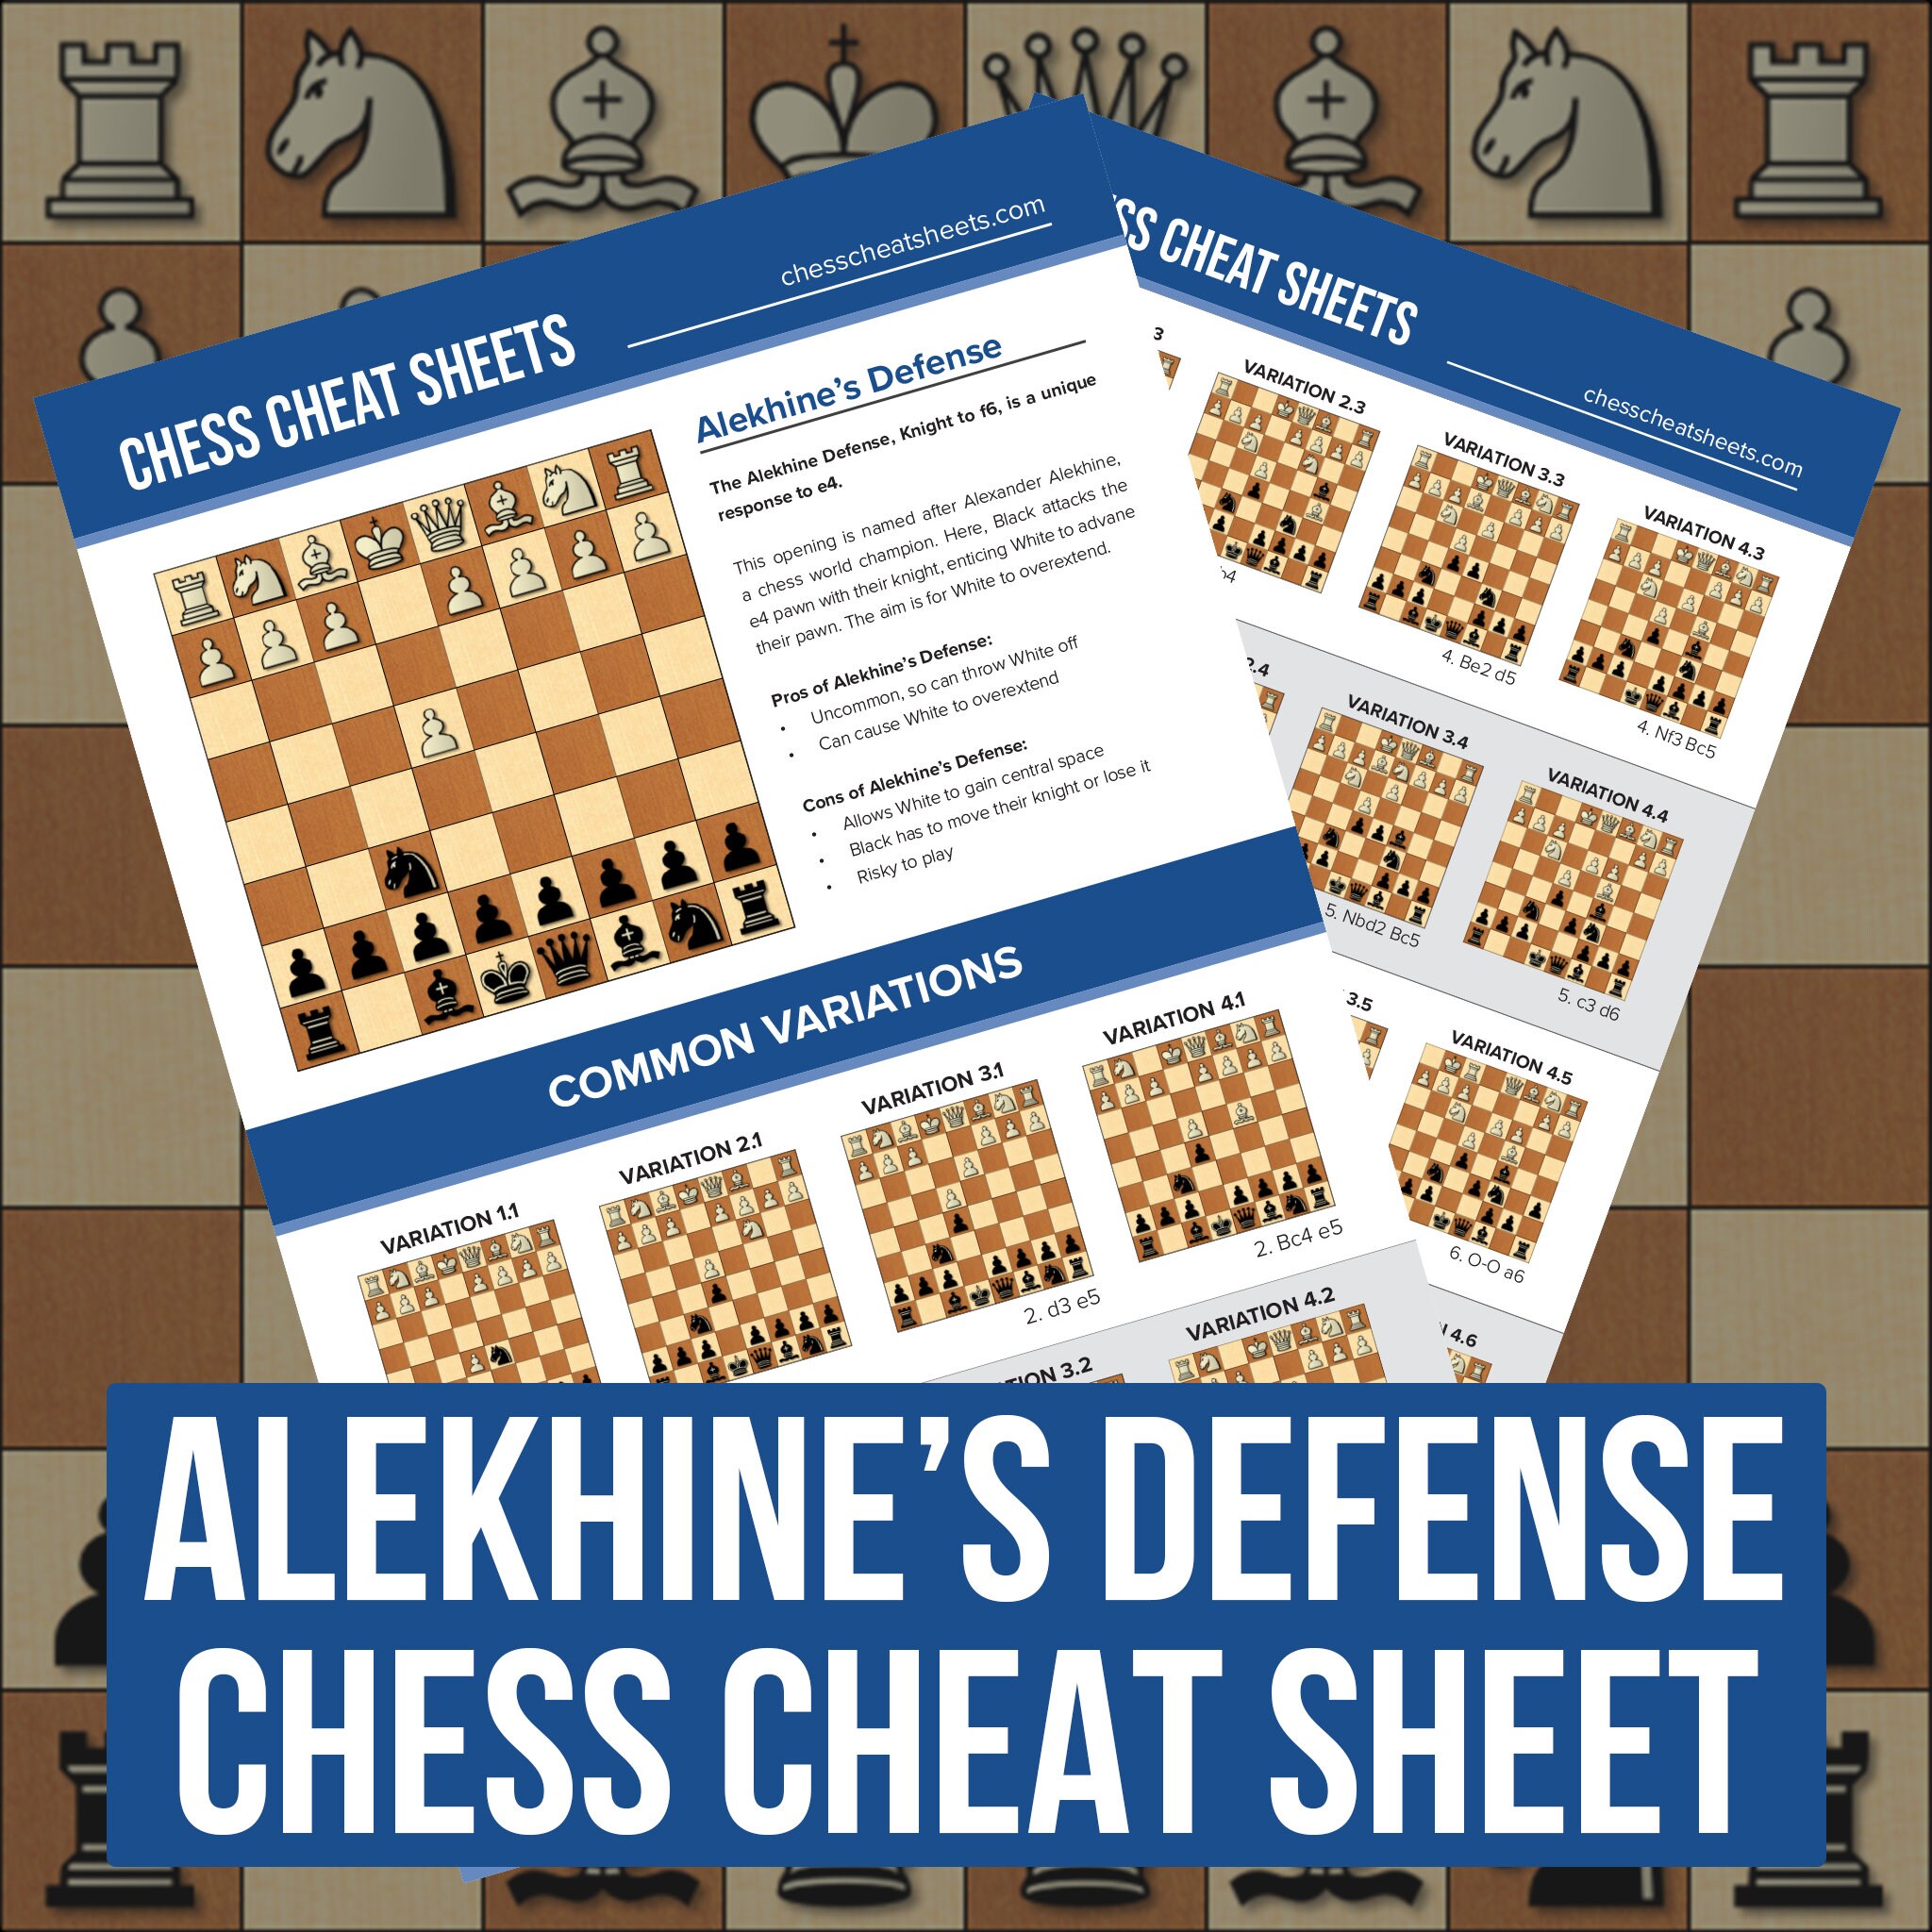 Complete this Move! Start Strong with the Alekhine Defense!